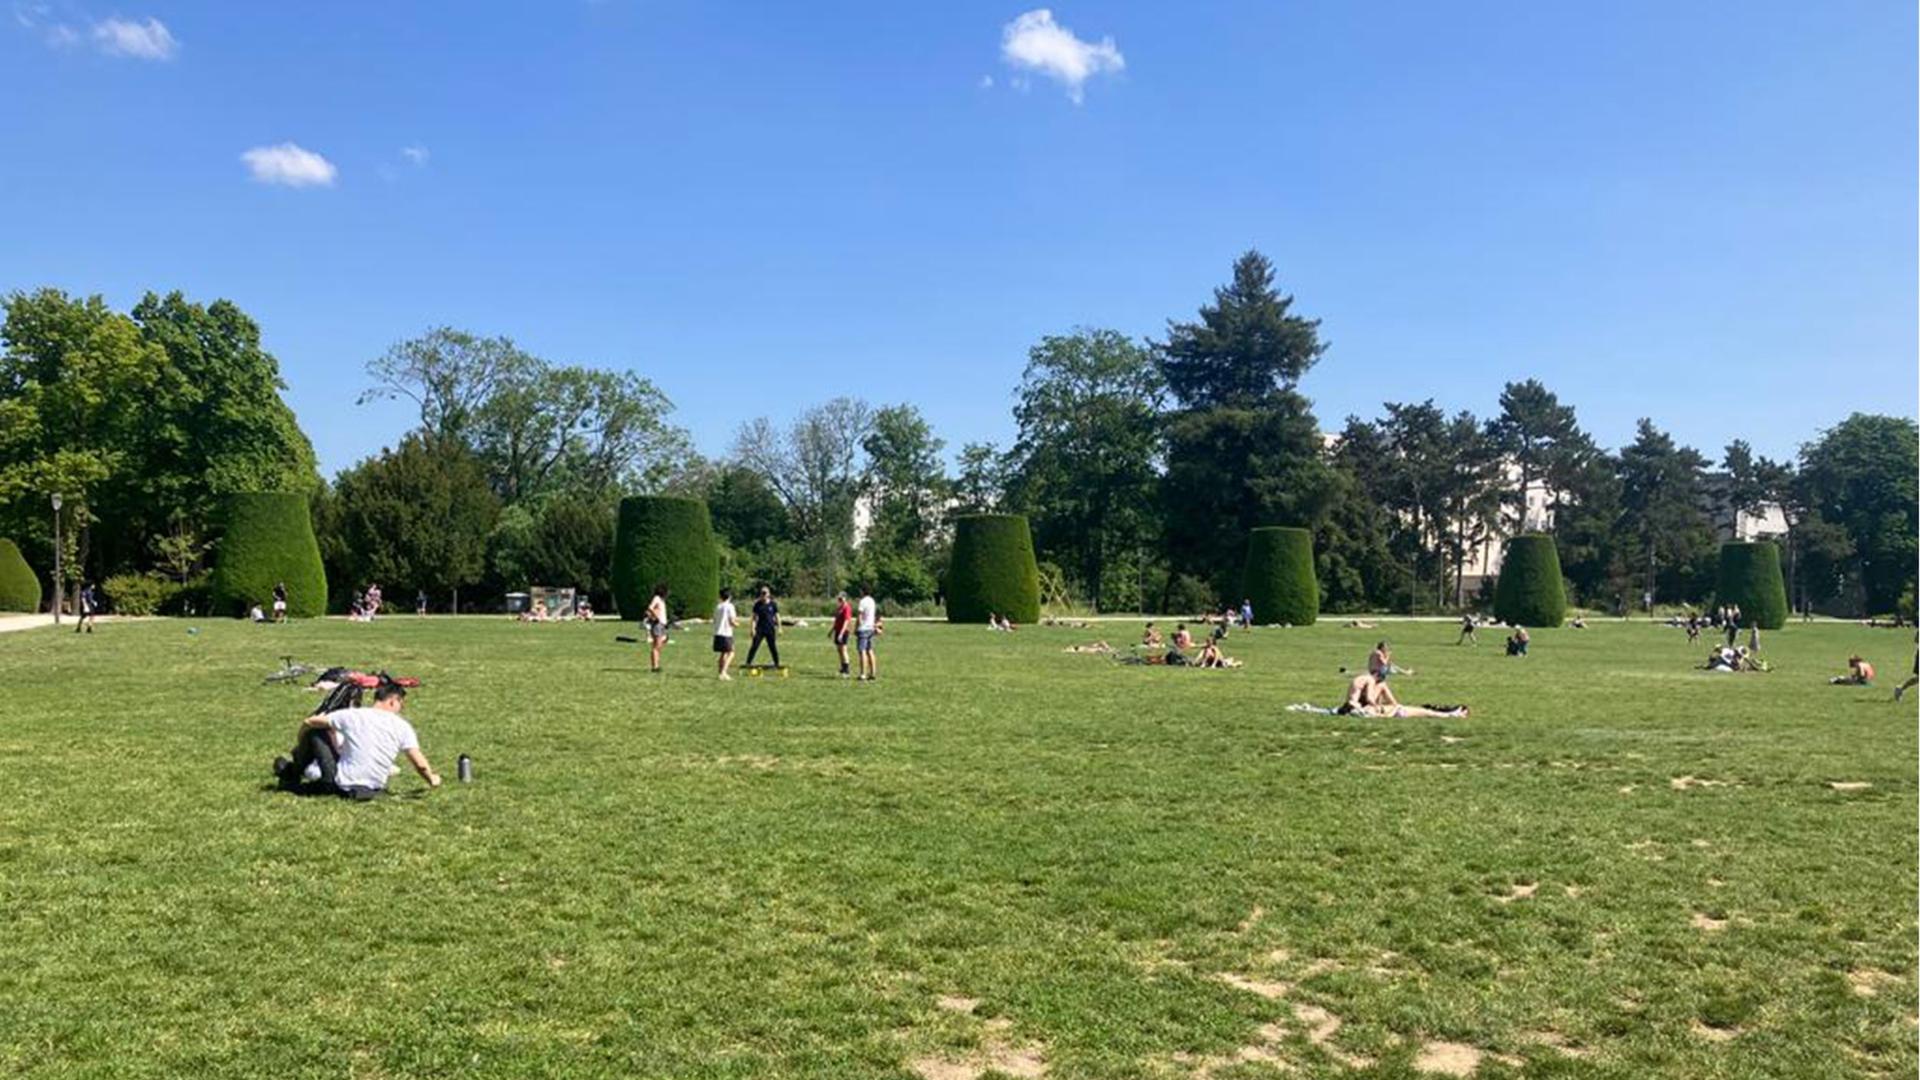 Students hang out on campus at Cité Internationale Universitaire in Paris, France, that admits thousands of international students every year.